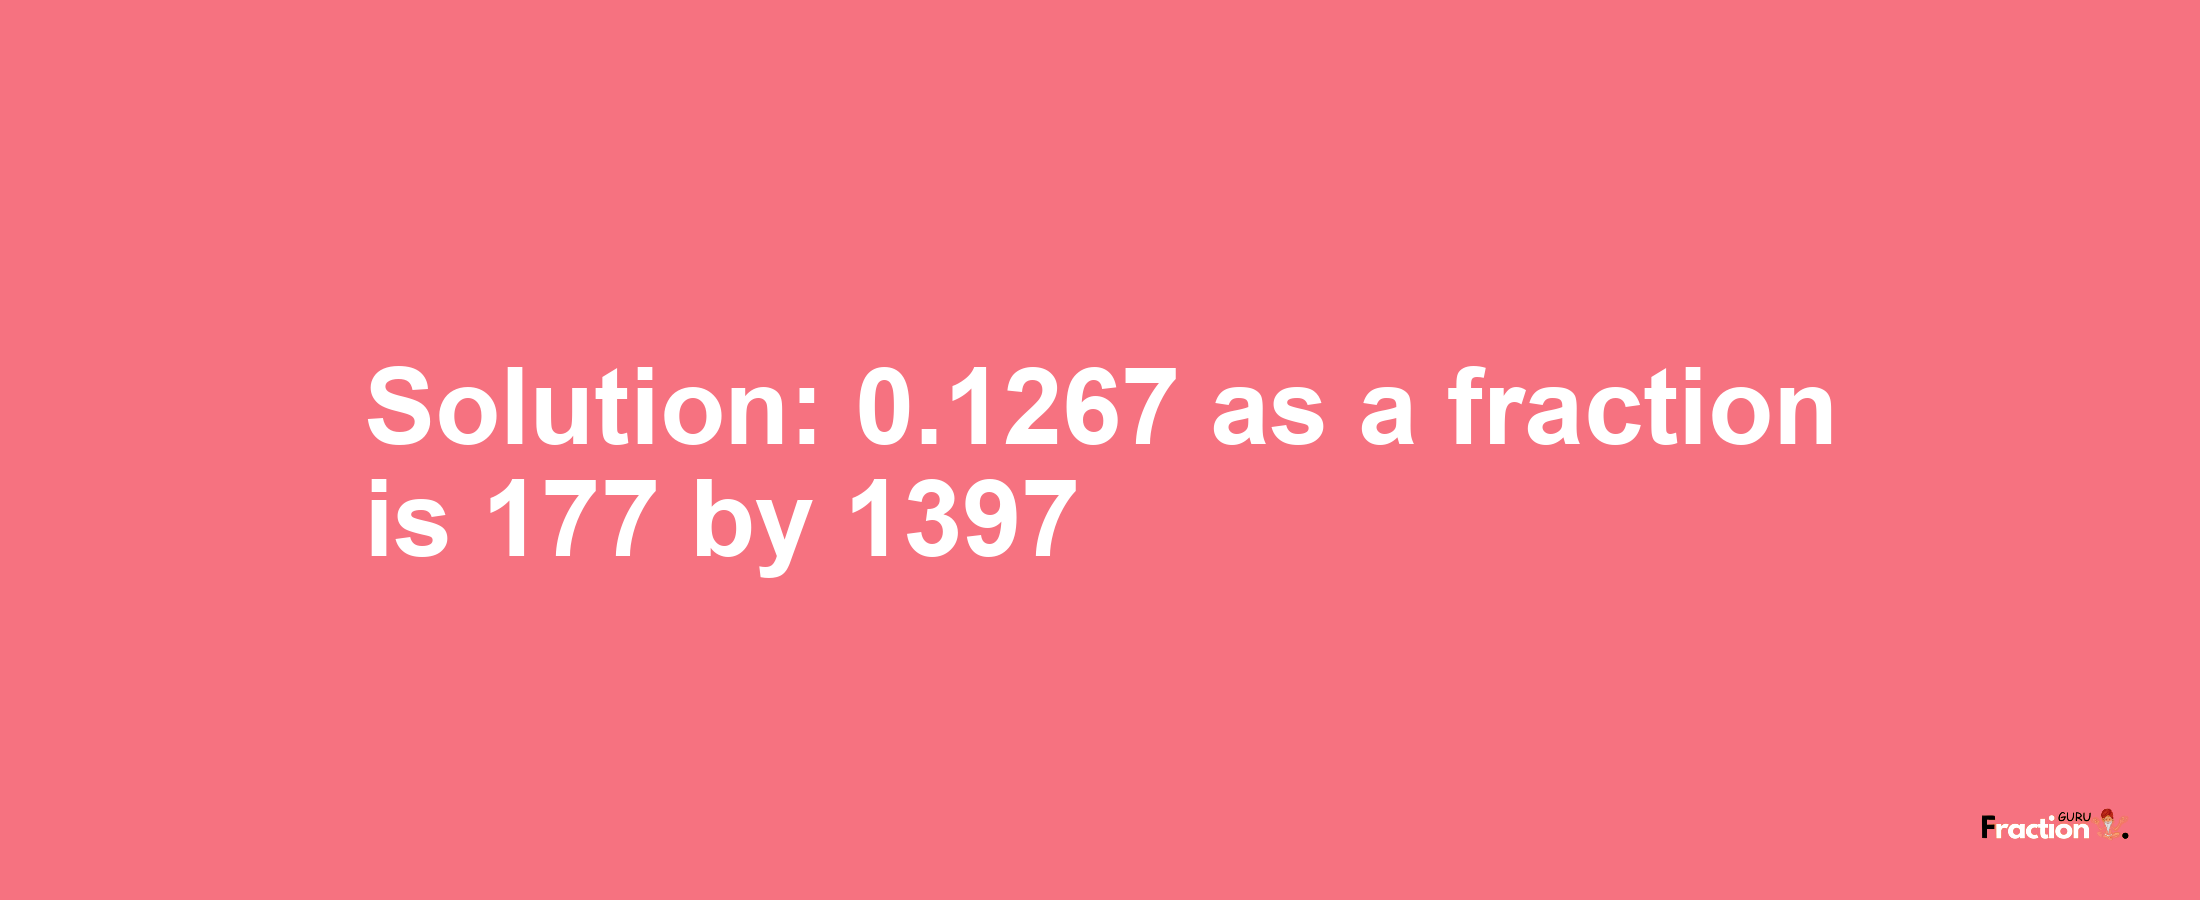 Solution:0.1267 as a fraction is 177/1397